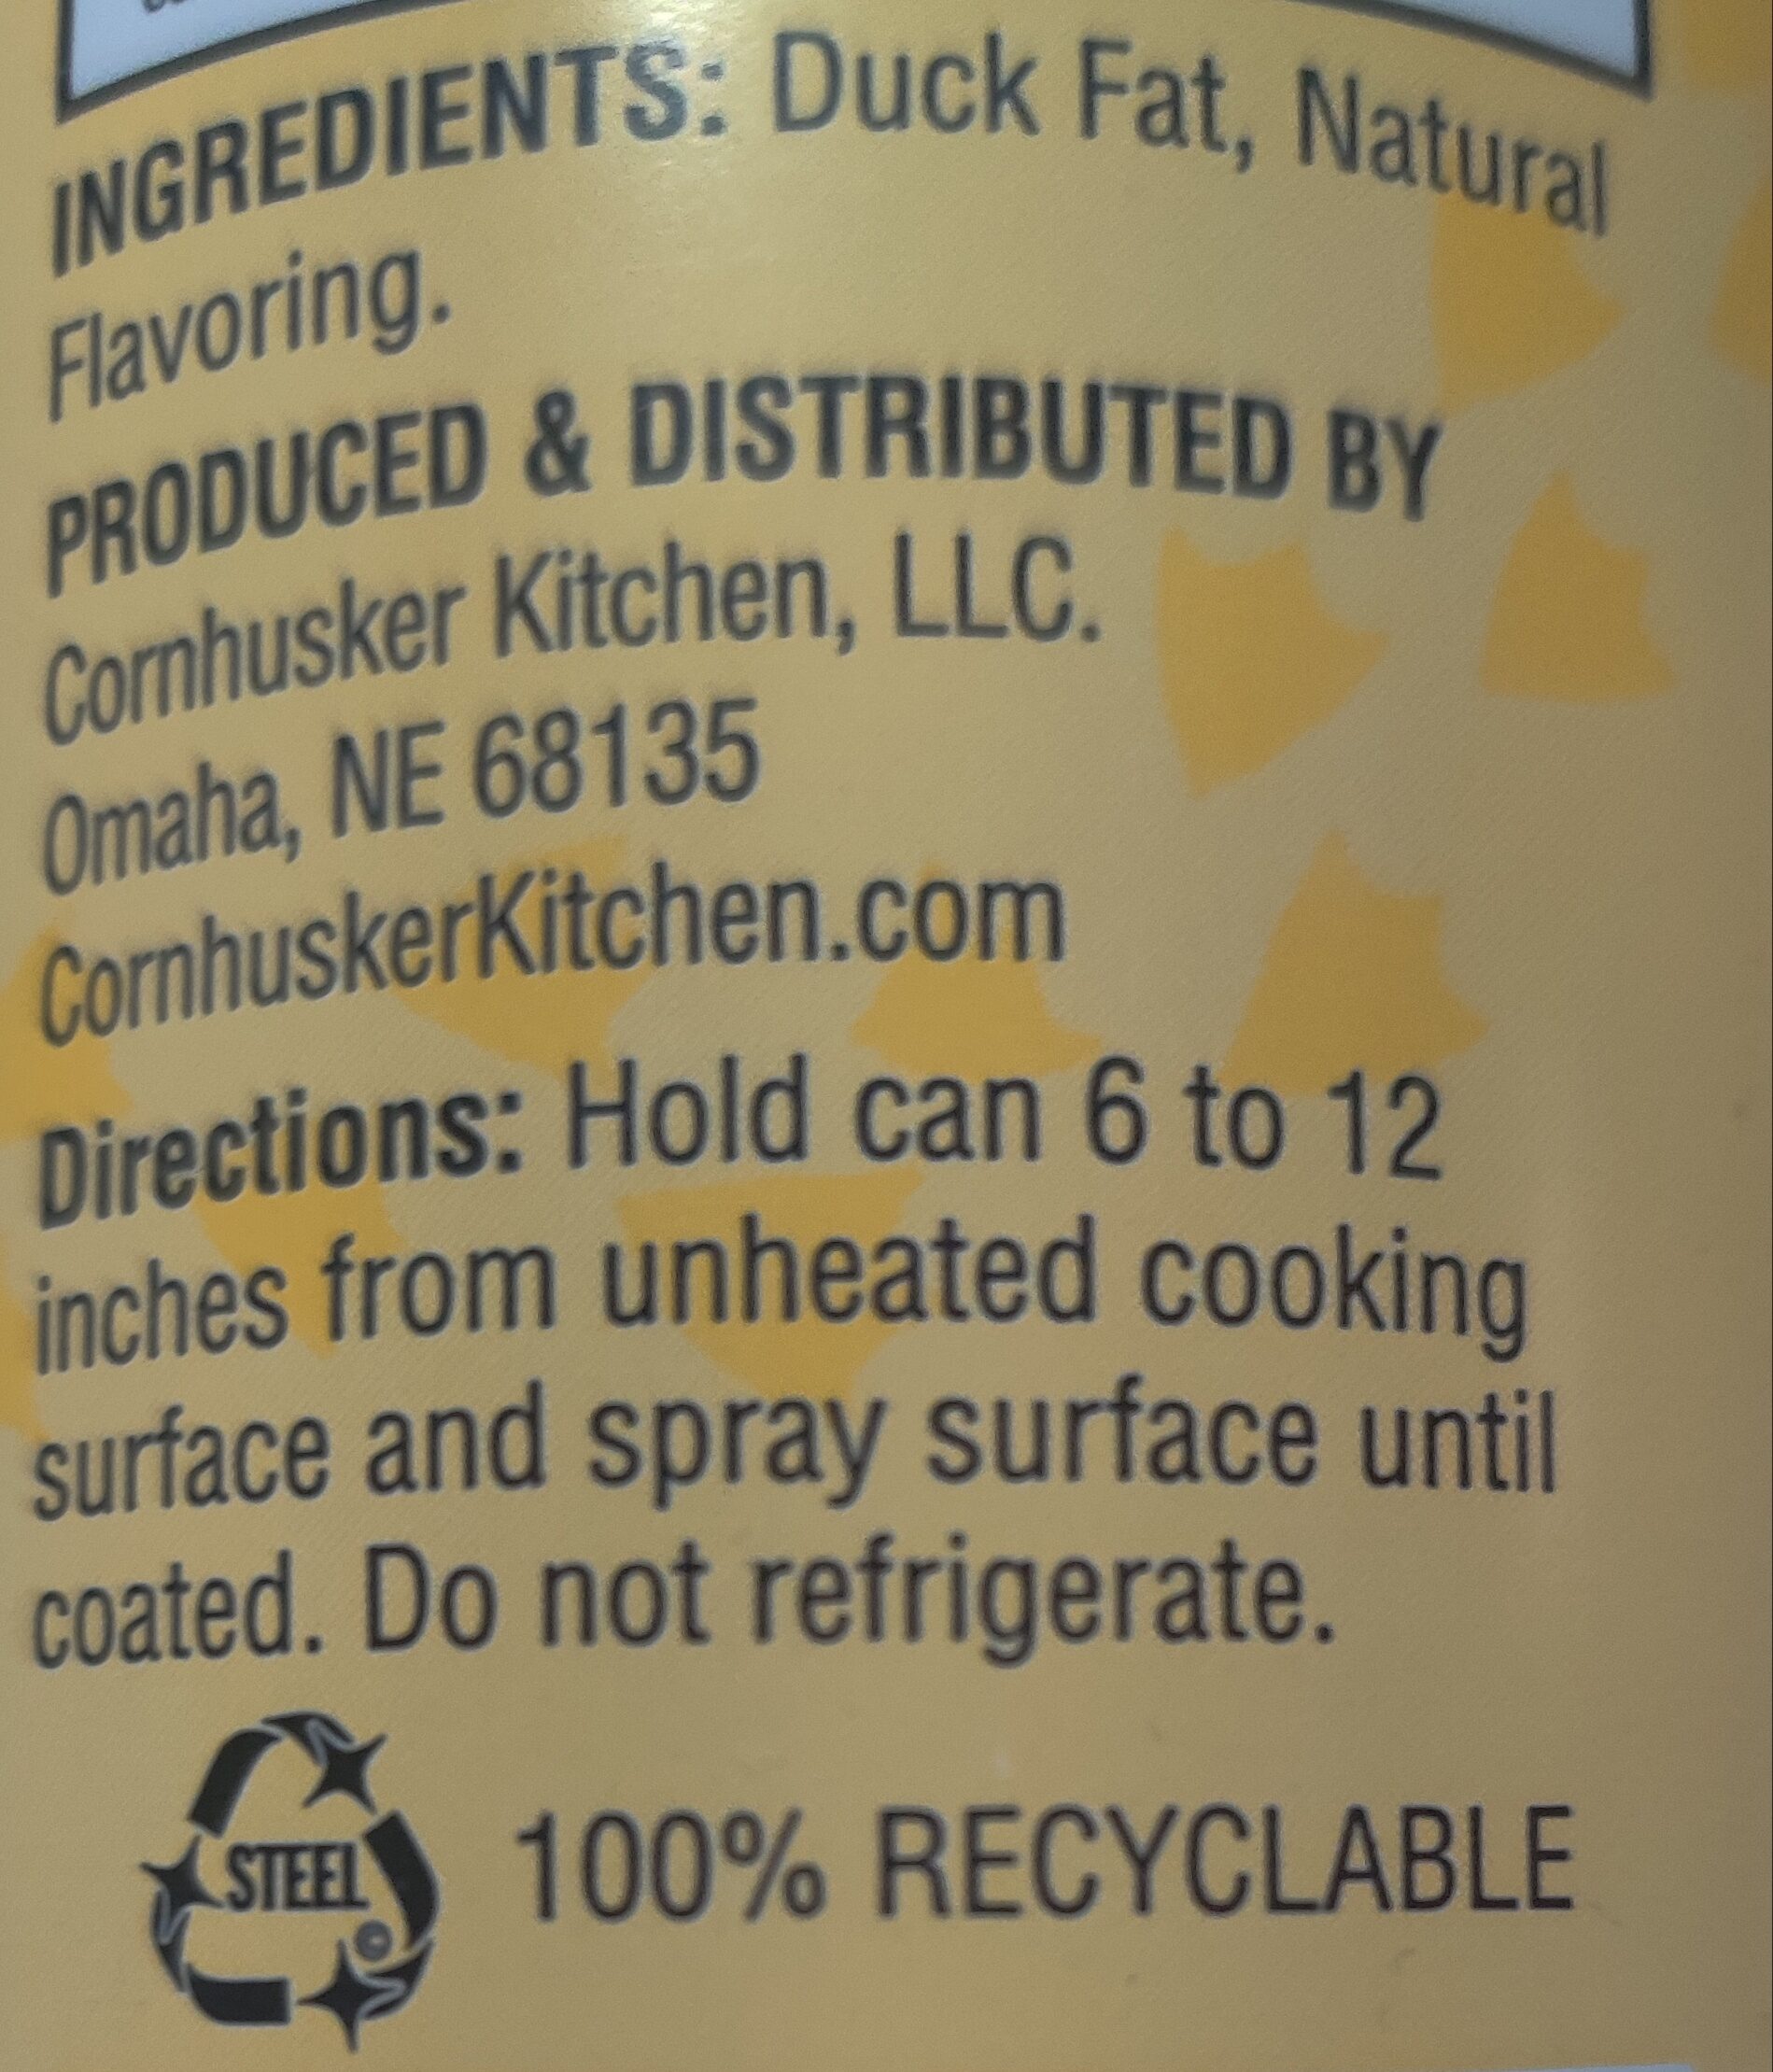 Gourmet duck fat - Recycling instructions and/or packaging information